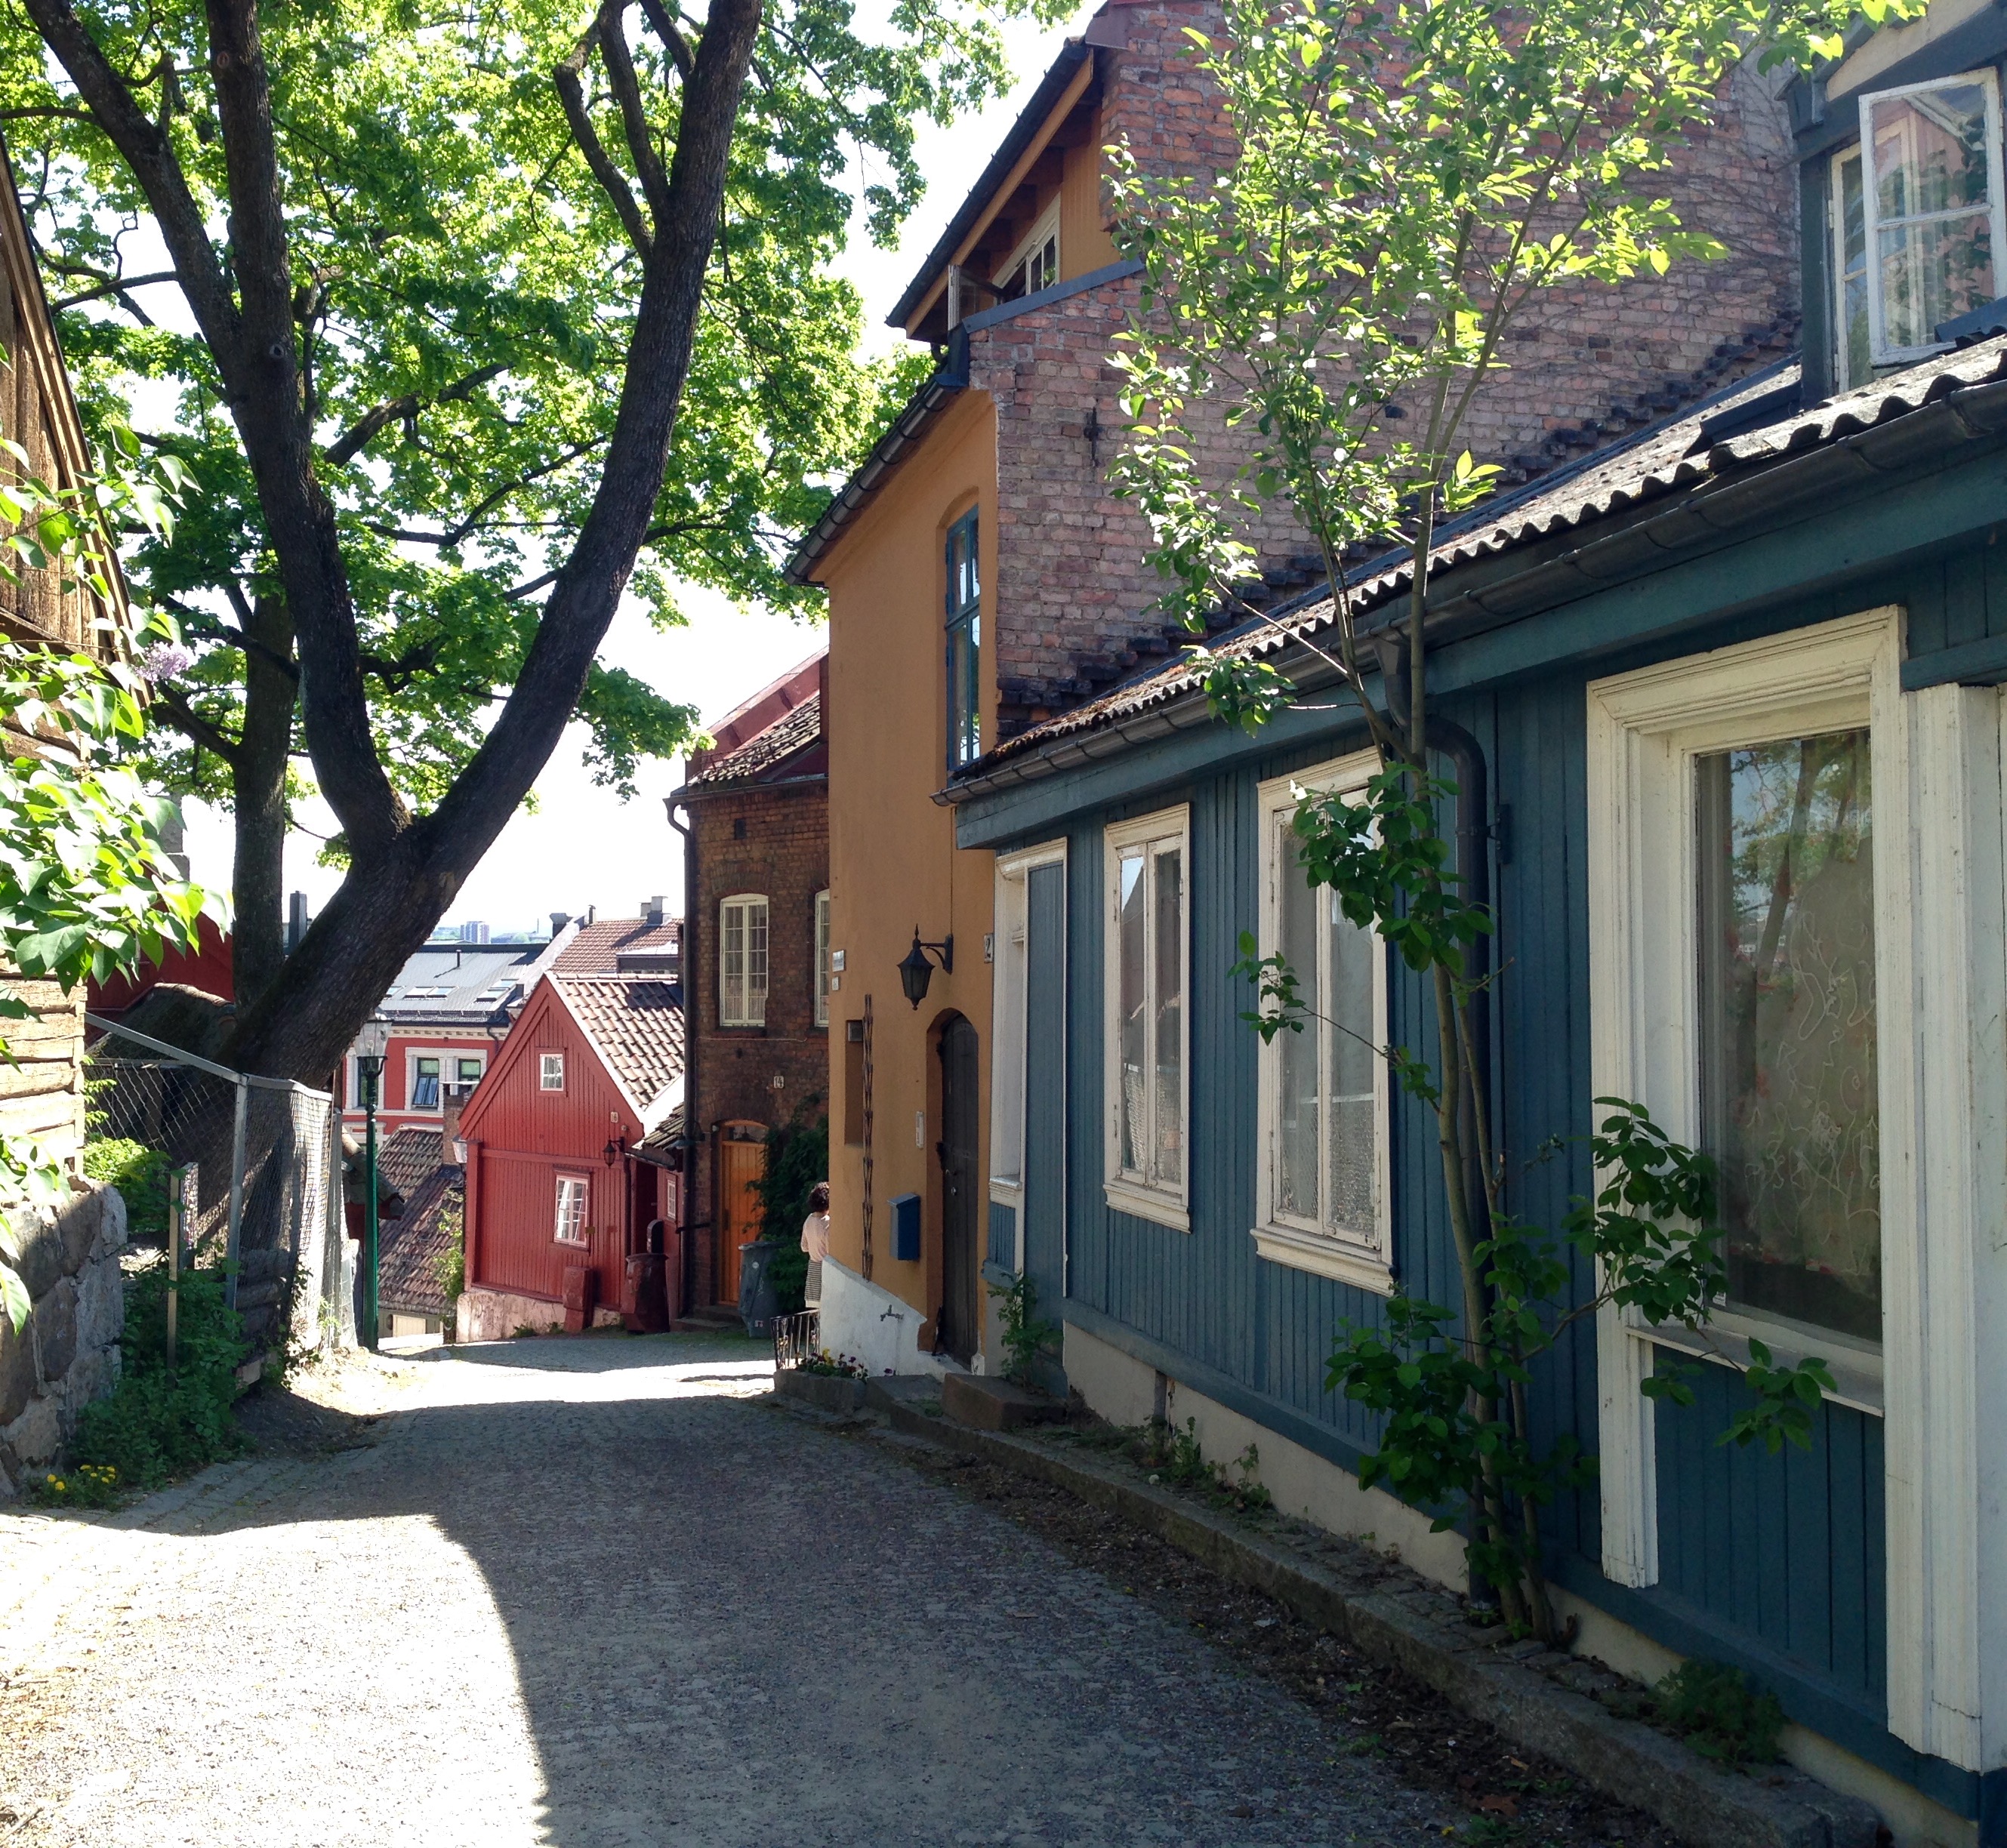 The Wooden Houses of Oslo